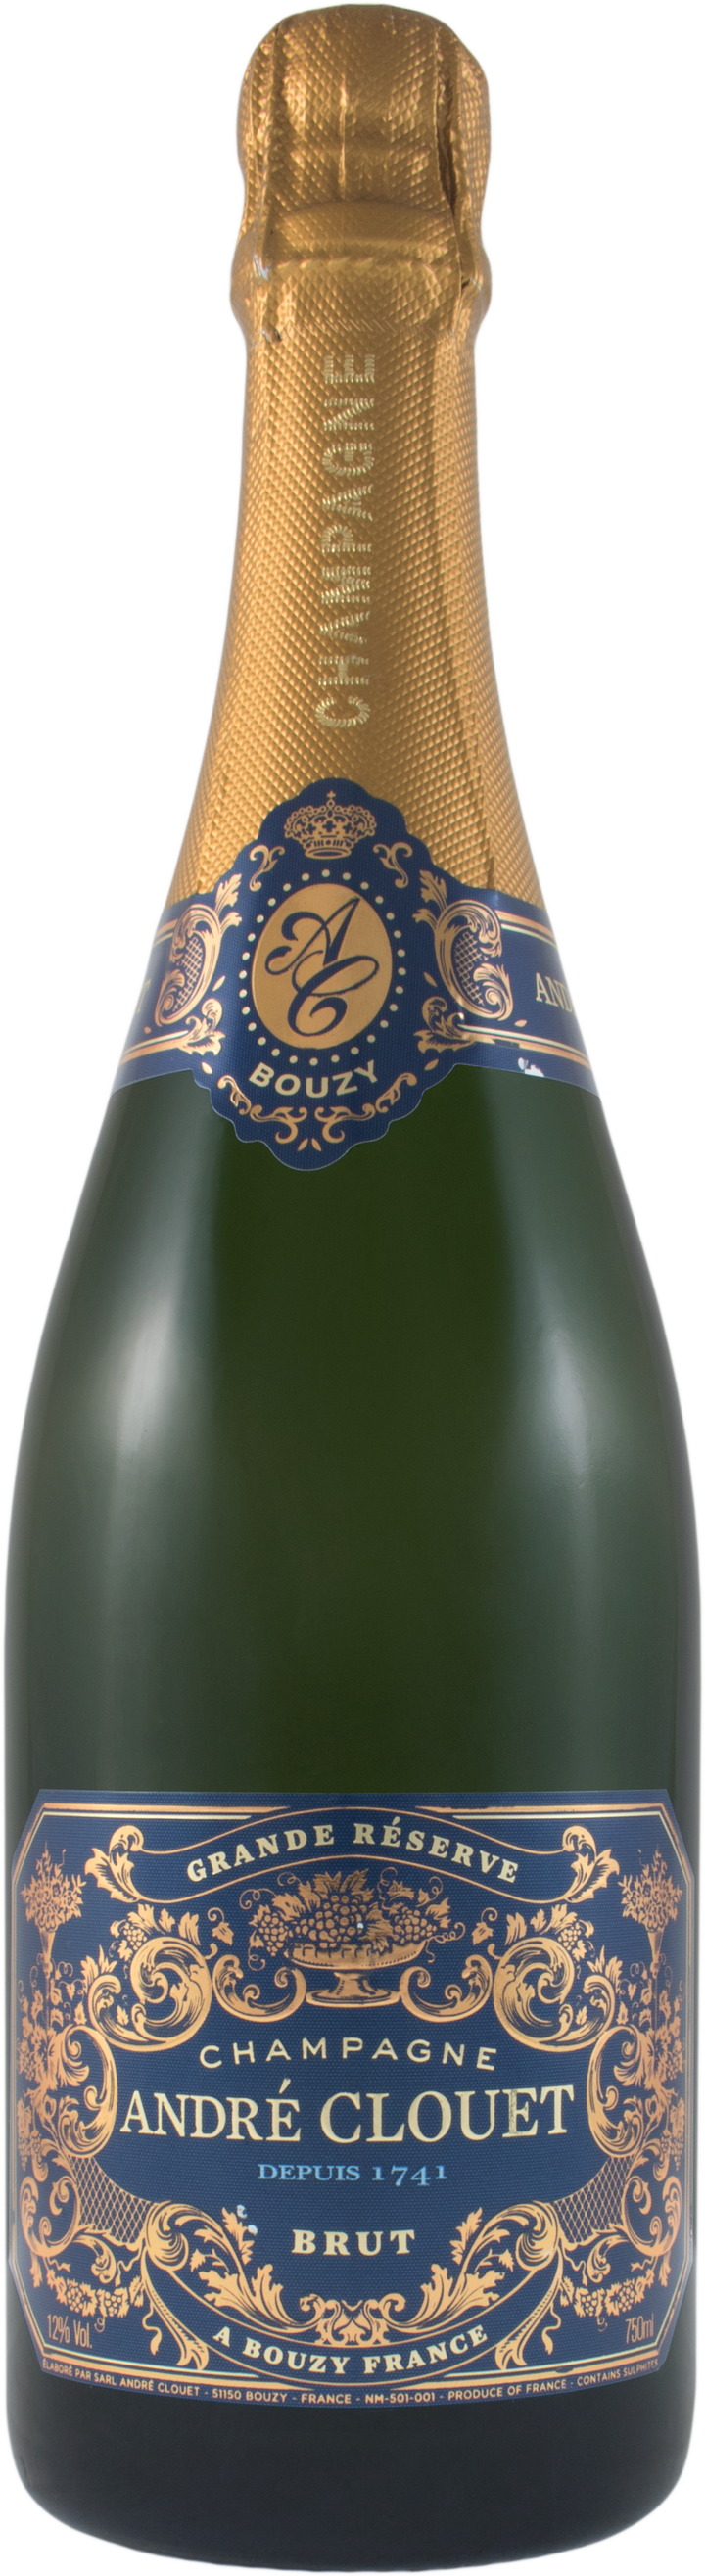 Andre Clouet Champagne Brut Grand Reserve 375ML